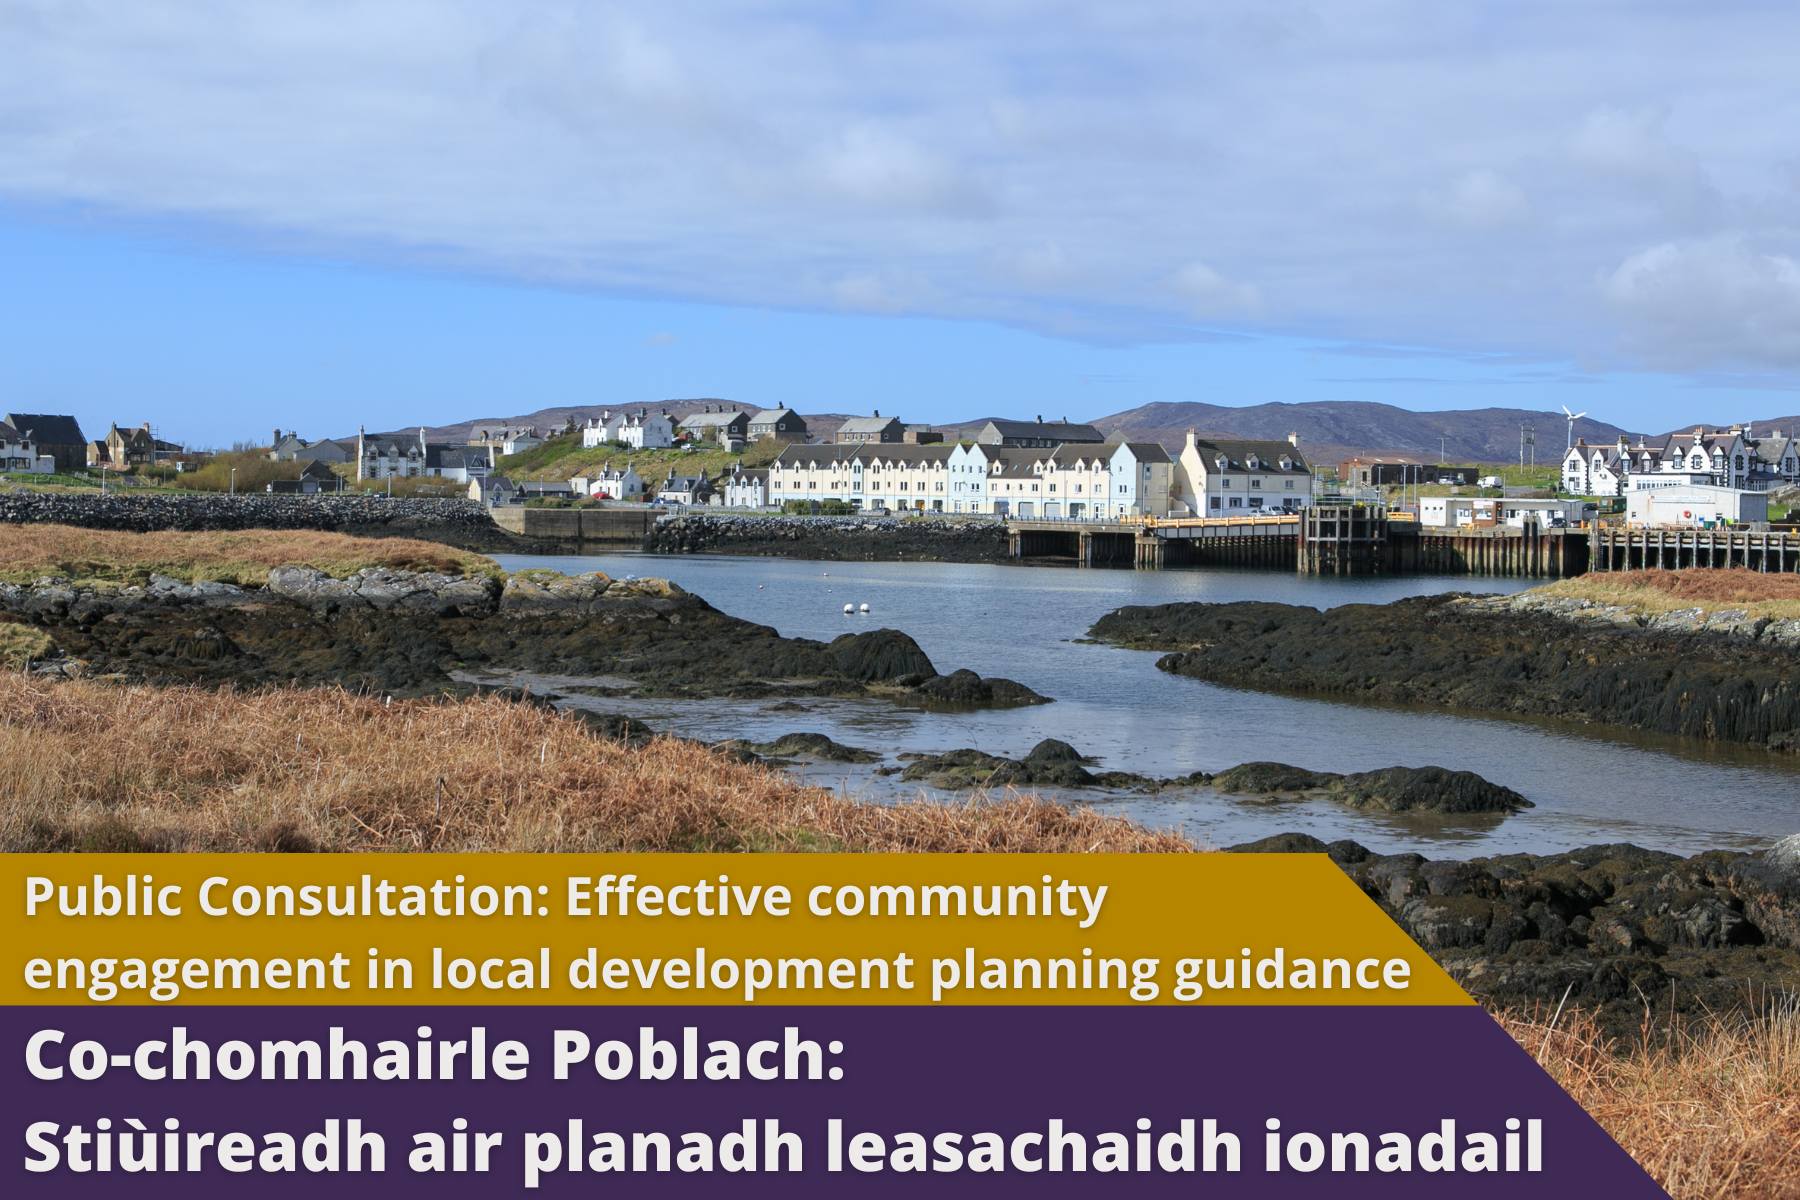 Consultation Response: Effective Community Engagement in Local Development Planning Guidance